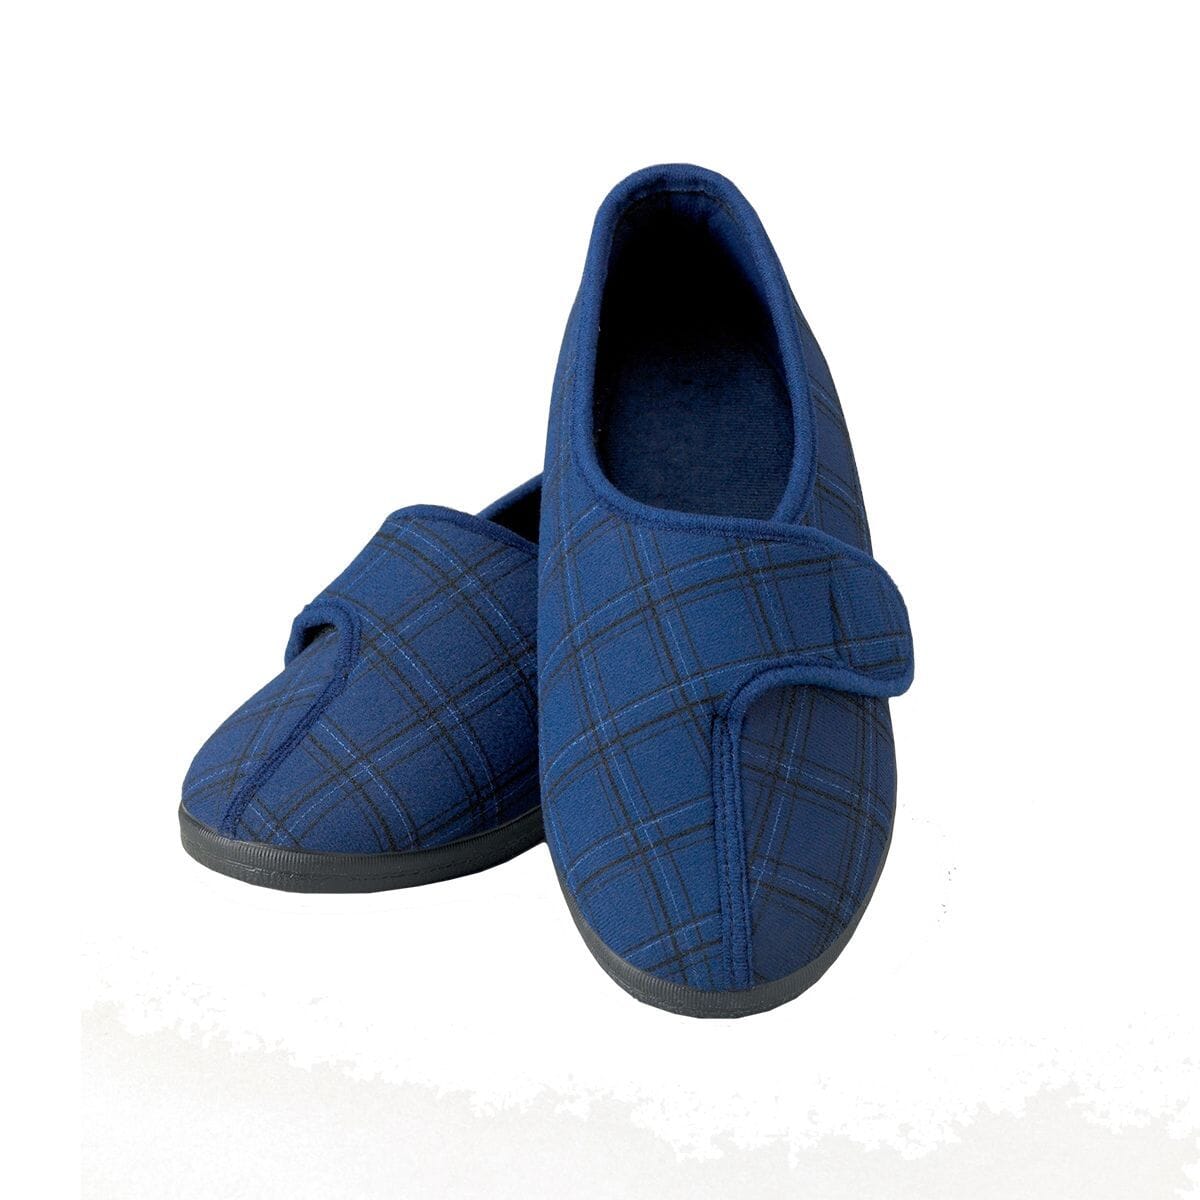 View Gents Washable Slippers Size 7 information